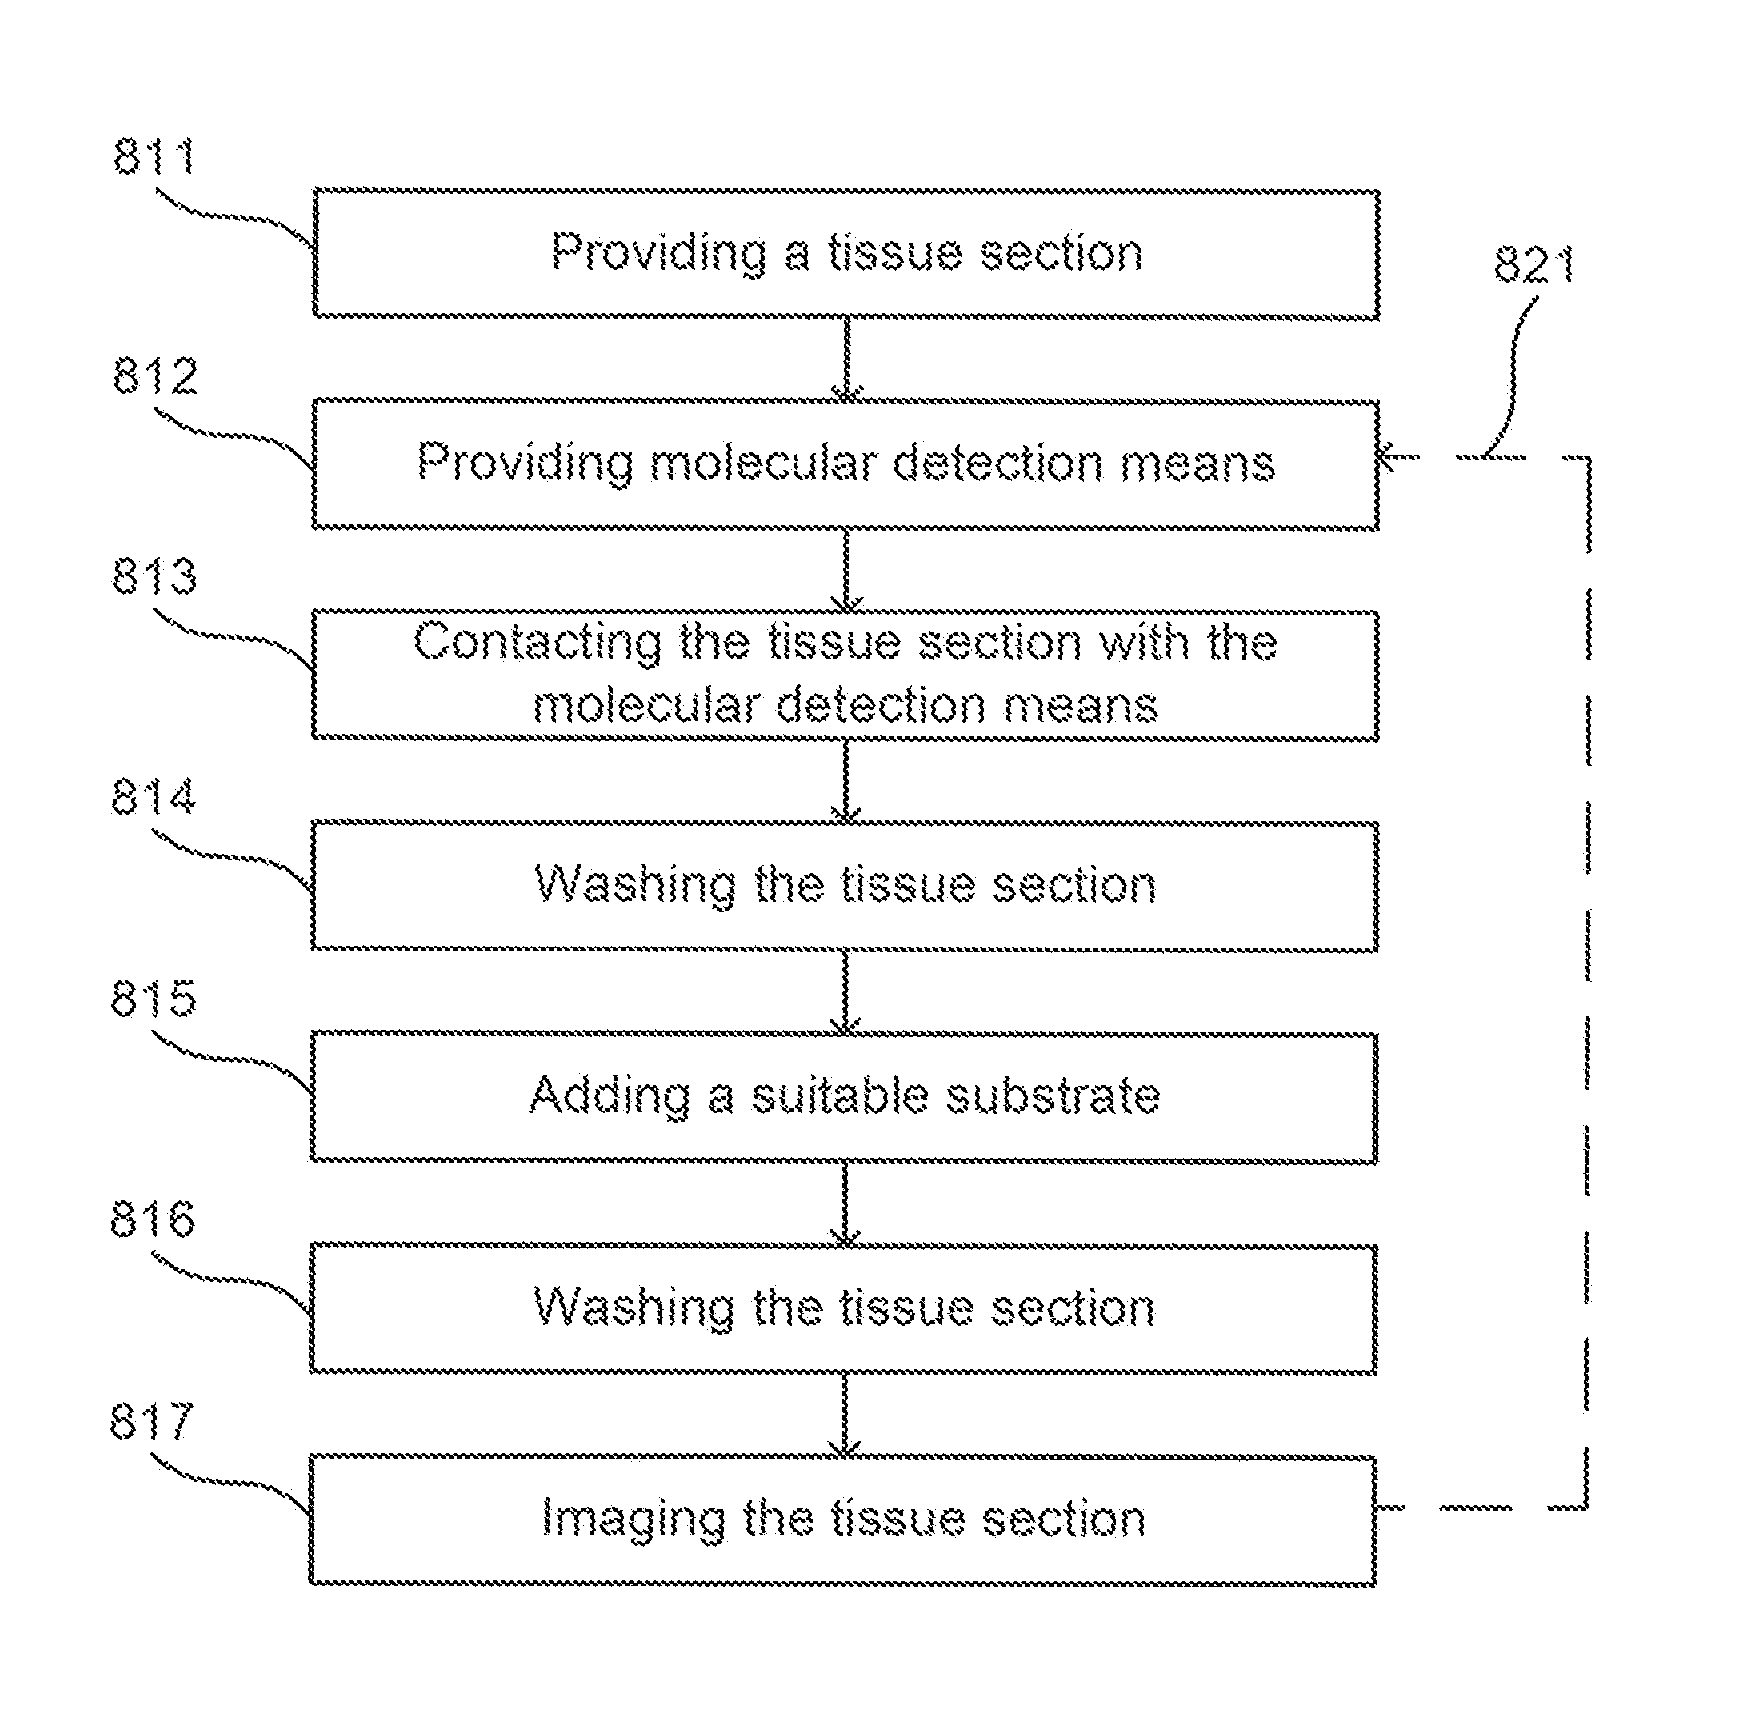 Method for providing images of a tissue section